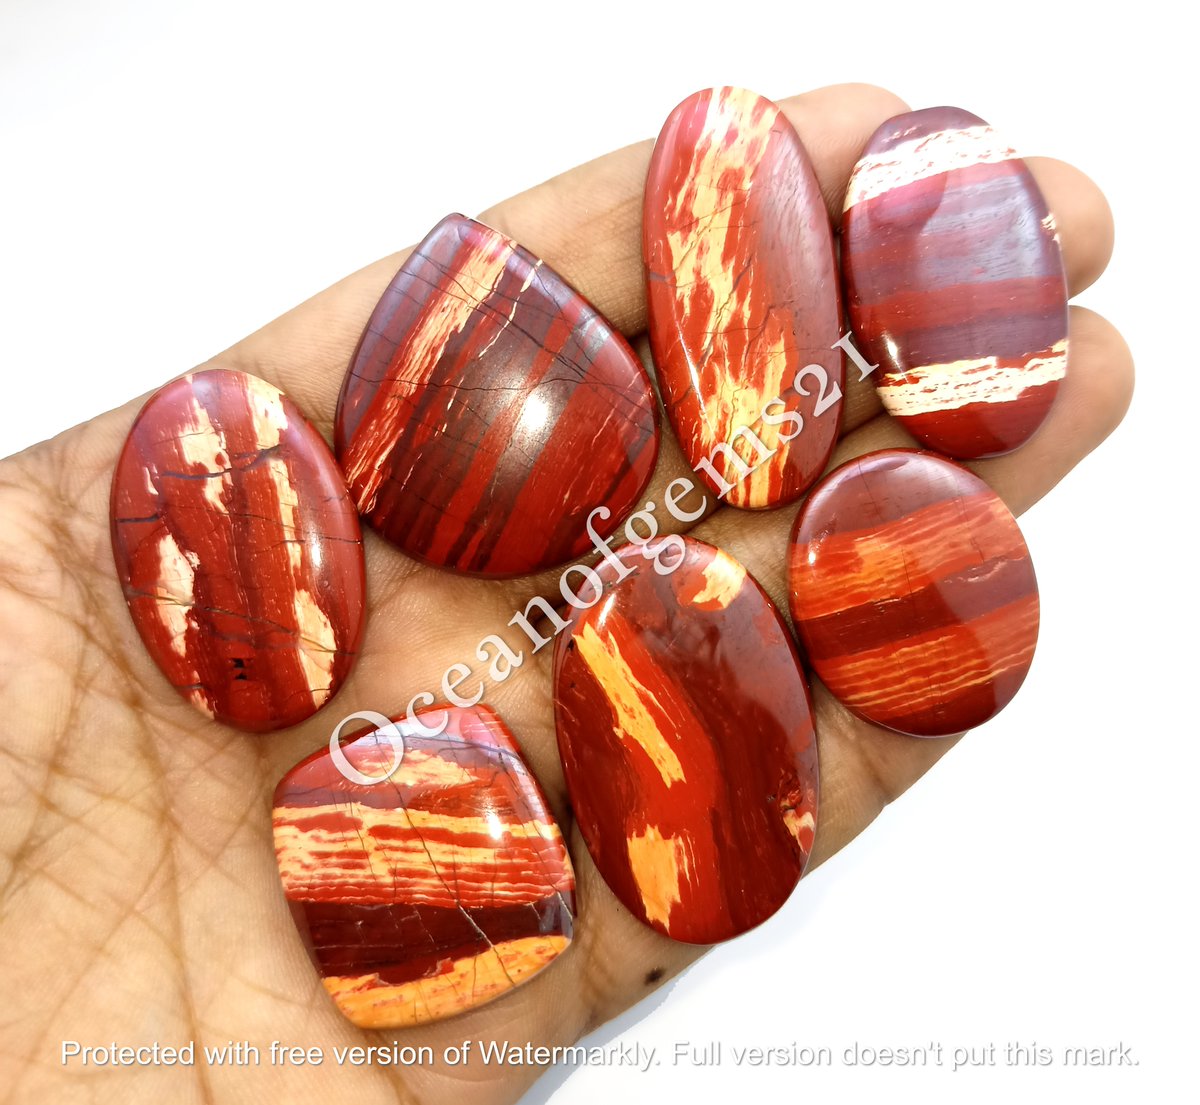 Natural Snakeskin Jasper Gemstone Cabochon Dm For Price Size 20 to 35mm Approx Free Drilling Service Worldwide Shipping$6 Combined Shipping Available #snakeskinjasper #snakeskinjasperstone #jasper #jaspercabochon #snakeskin #snakeskingemstone #snakeskinjaspercabochon #snake